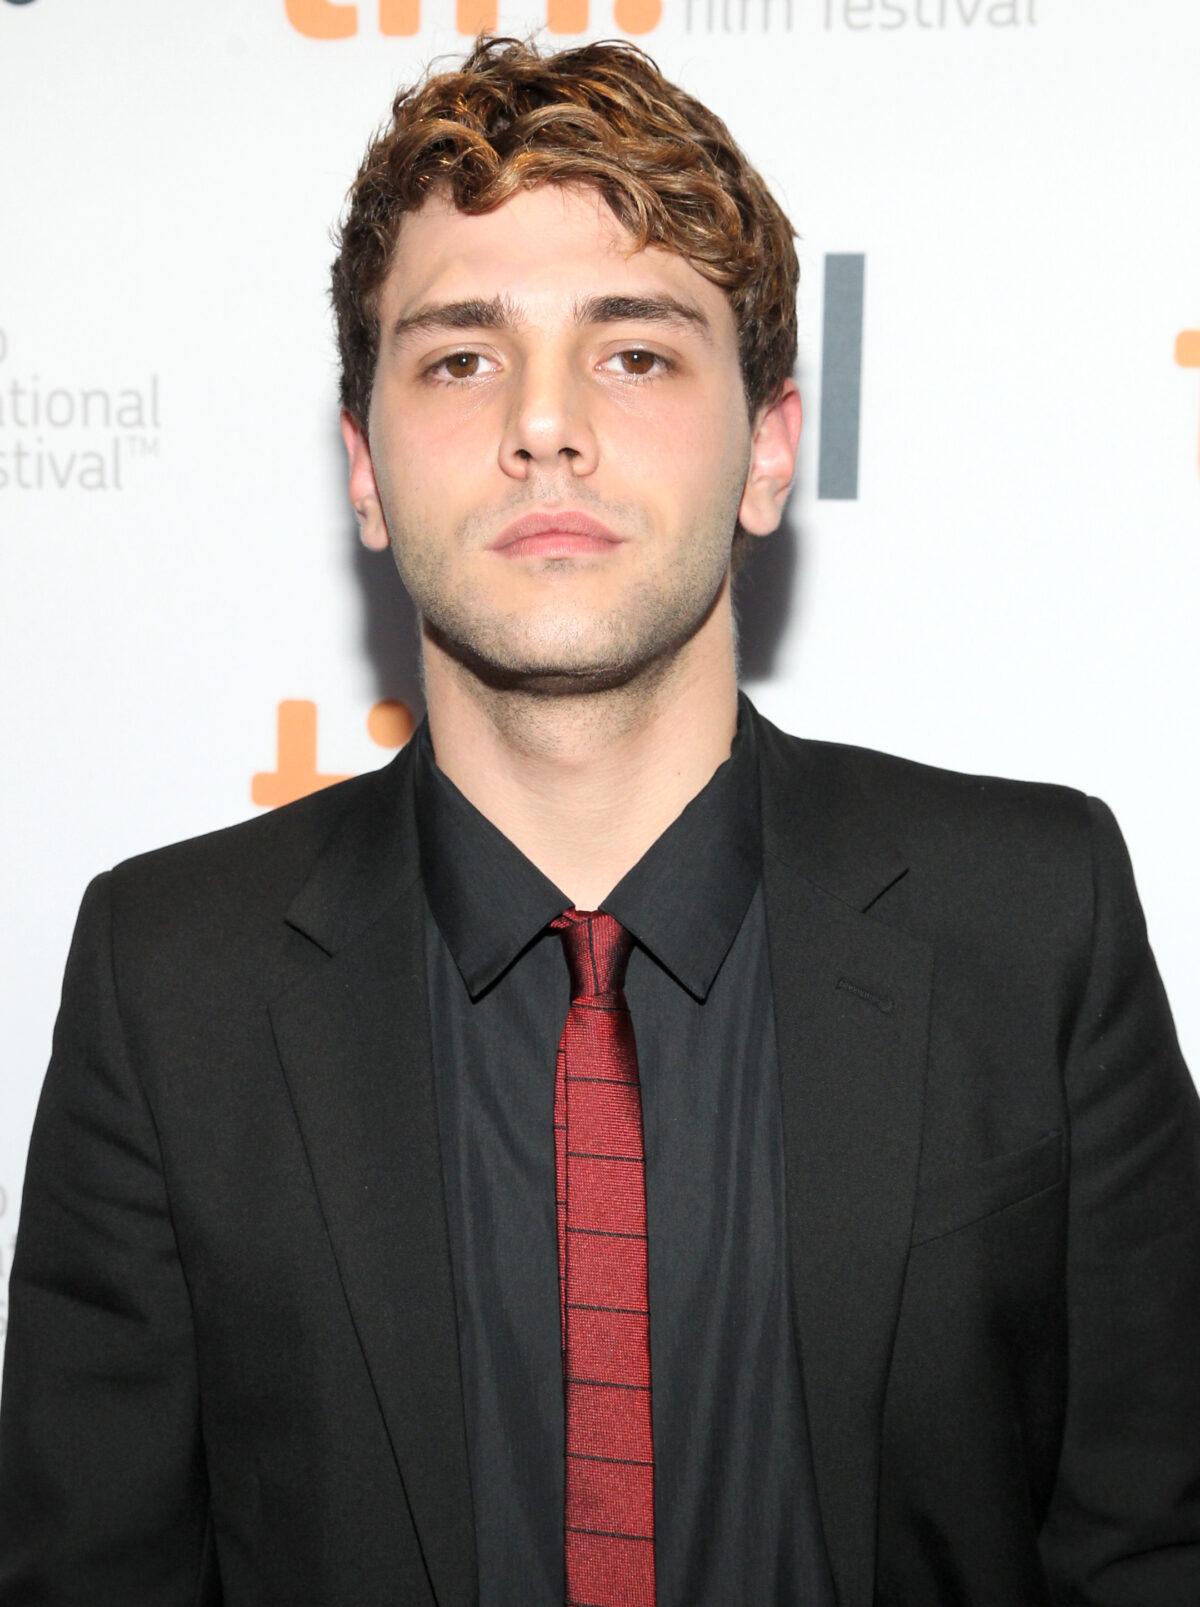 Actor Xavier Dolan, who plays the character Michael, attends the "Elephant Song" premiere during the 2014 Toronto International Film Festival at Isabel Bader Theatre in Toronto, Canada, on Sept. 10, 2014. (Jonathan Leibson/Getty Images)